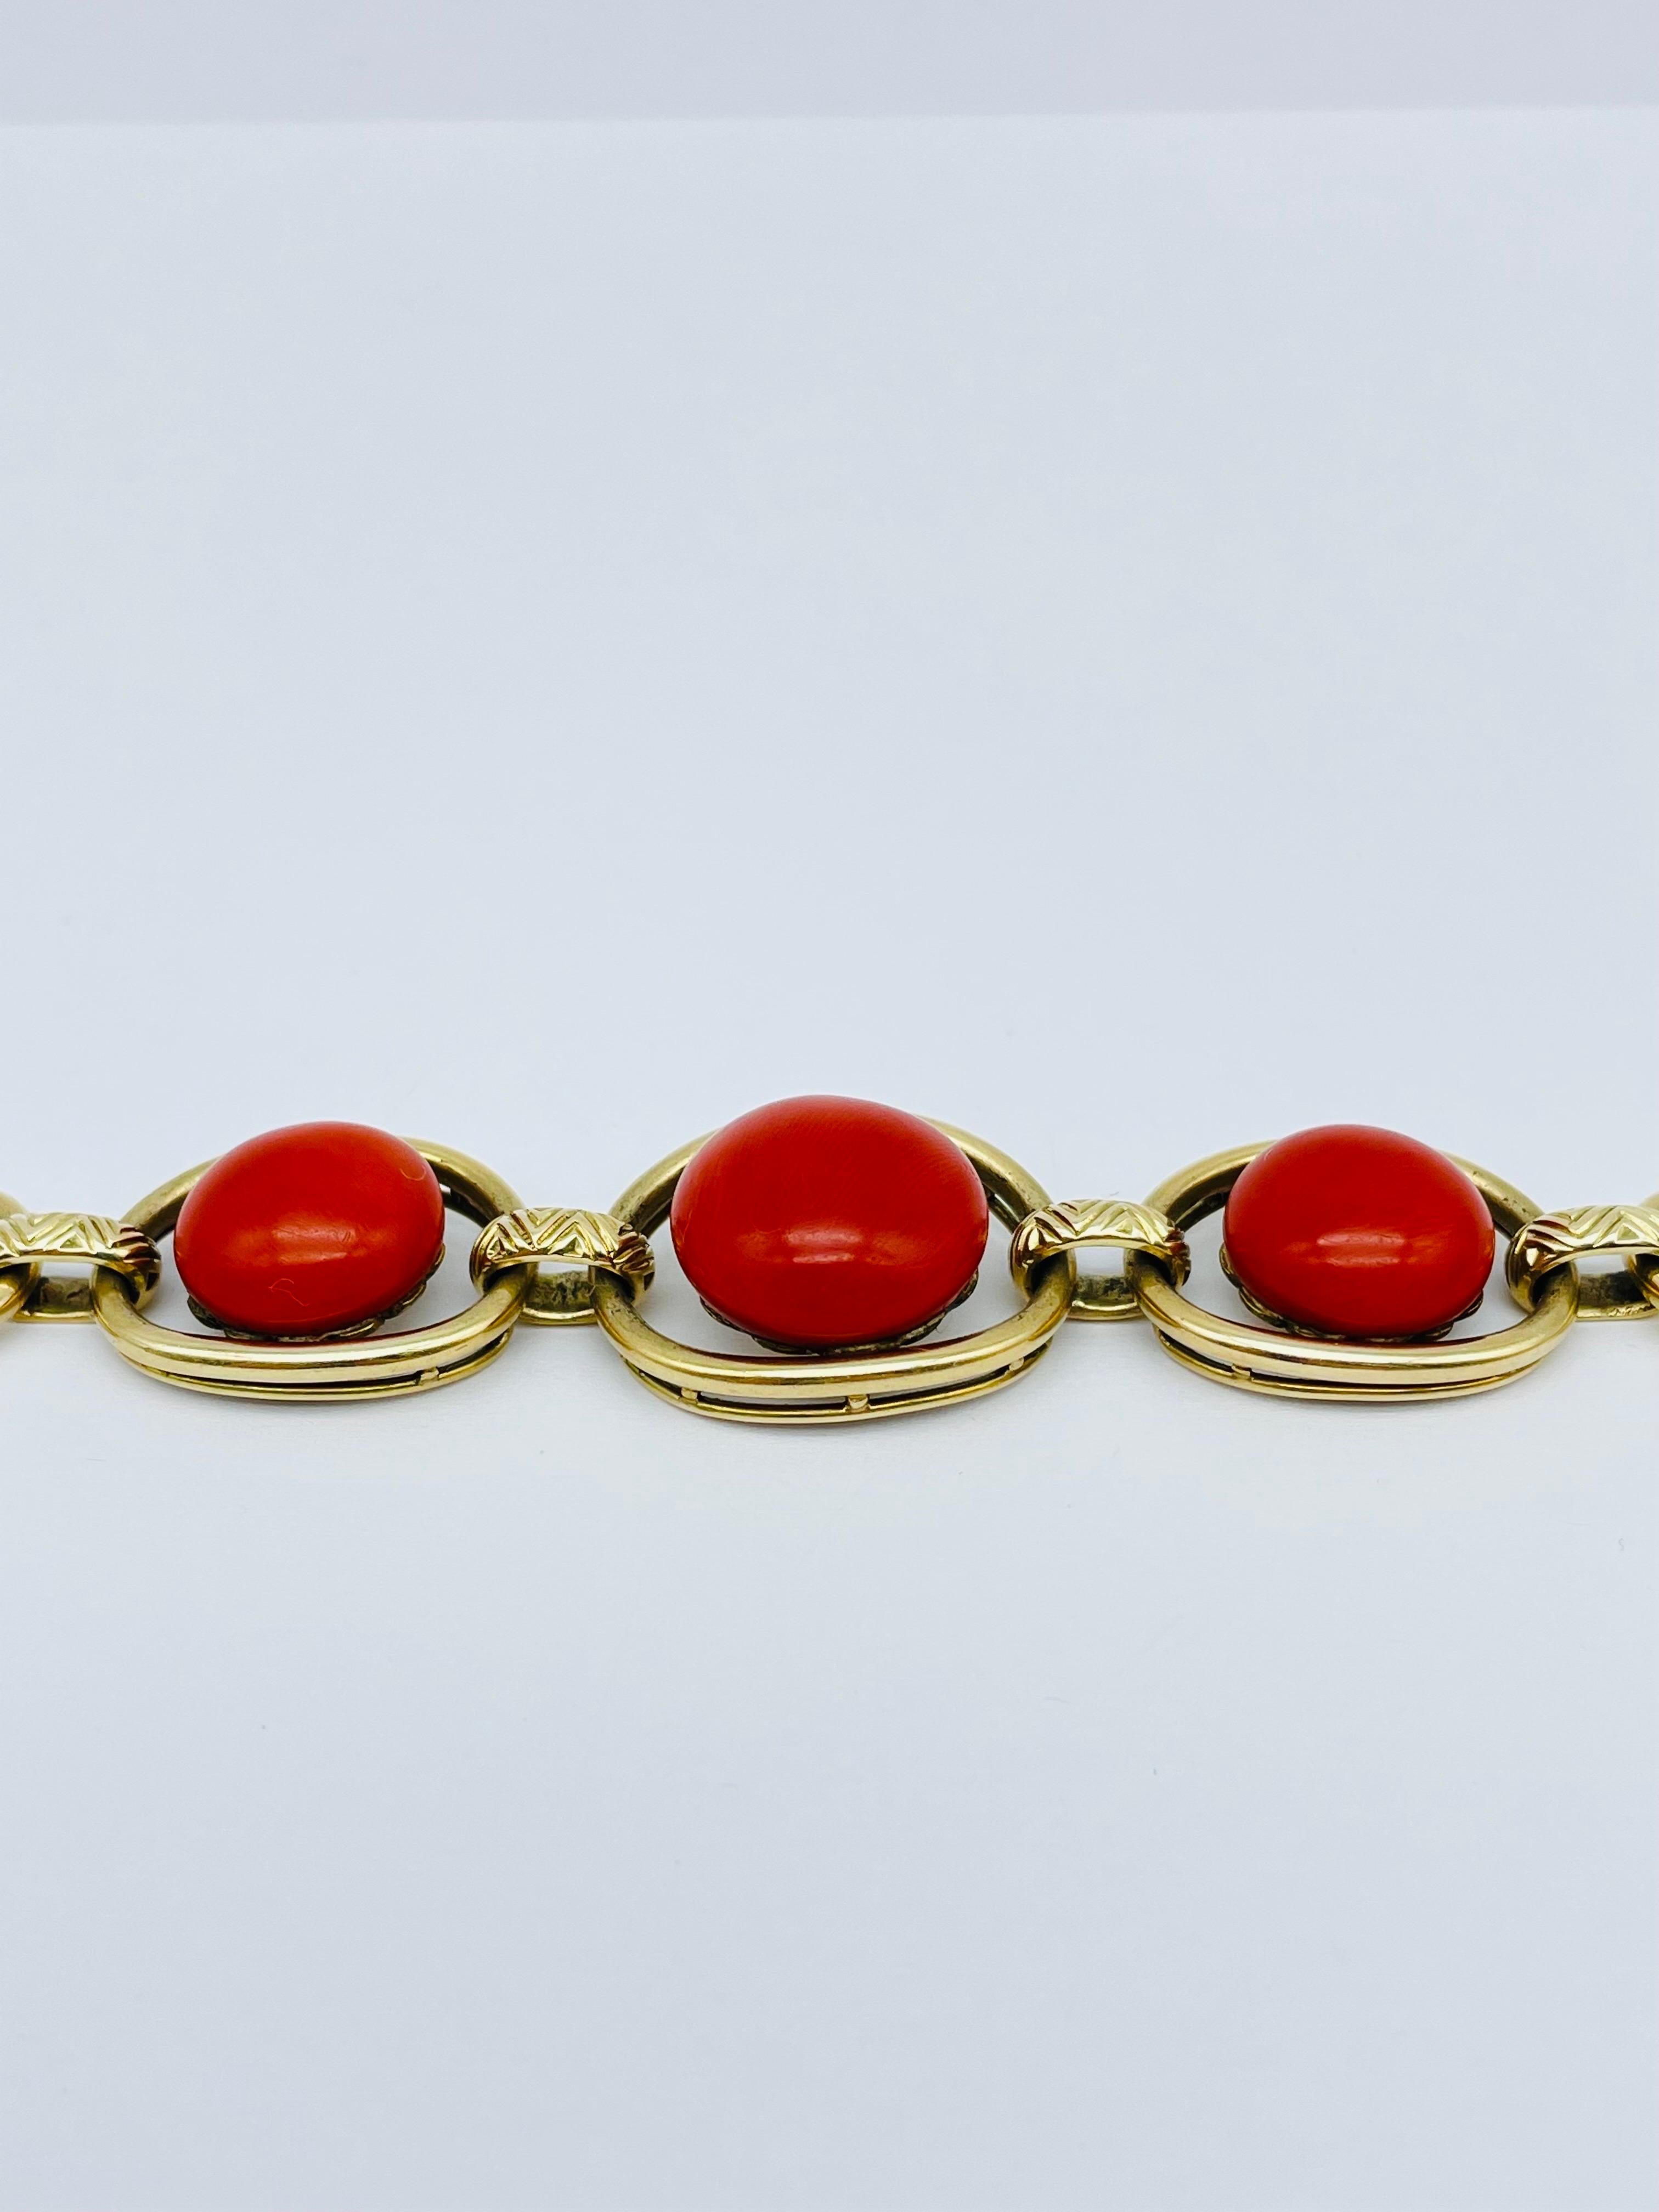 Exceptional Bracelet 14k Gold Link Chain Red Coral In Good Condition For Sale In Berlin, BE